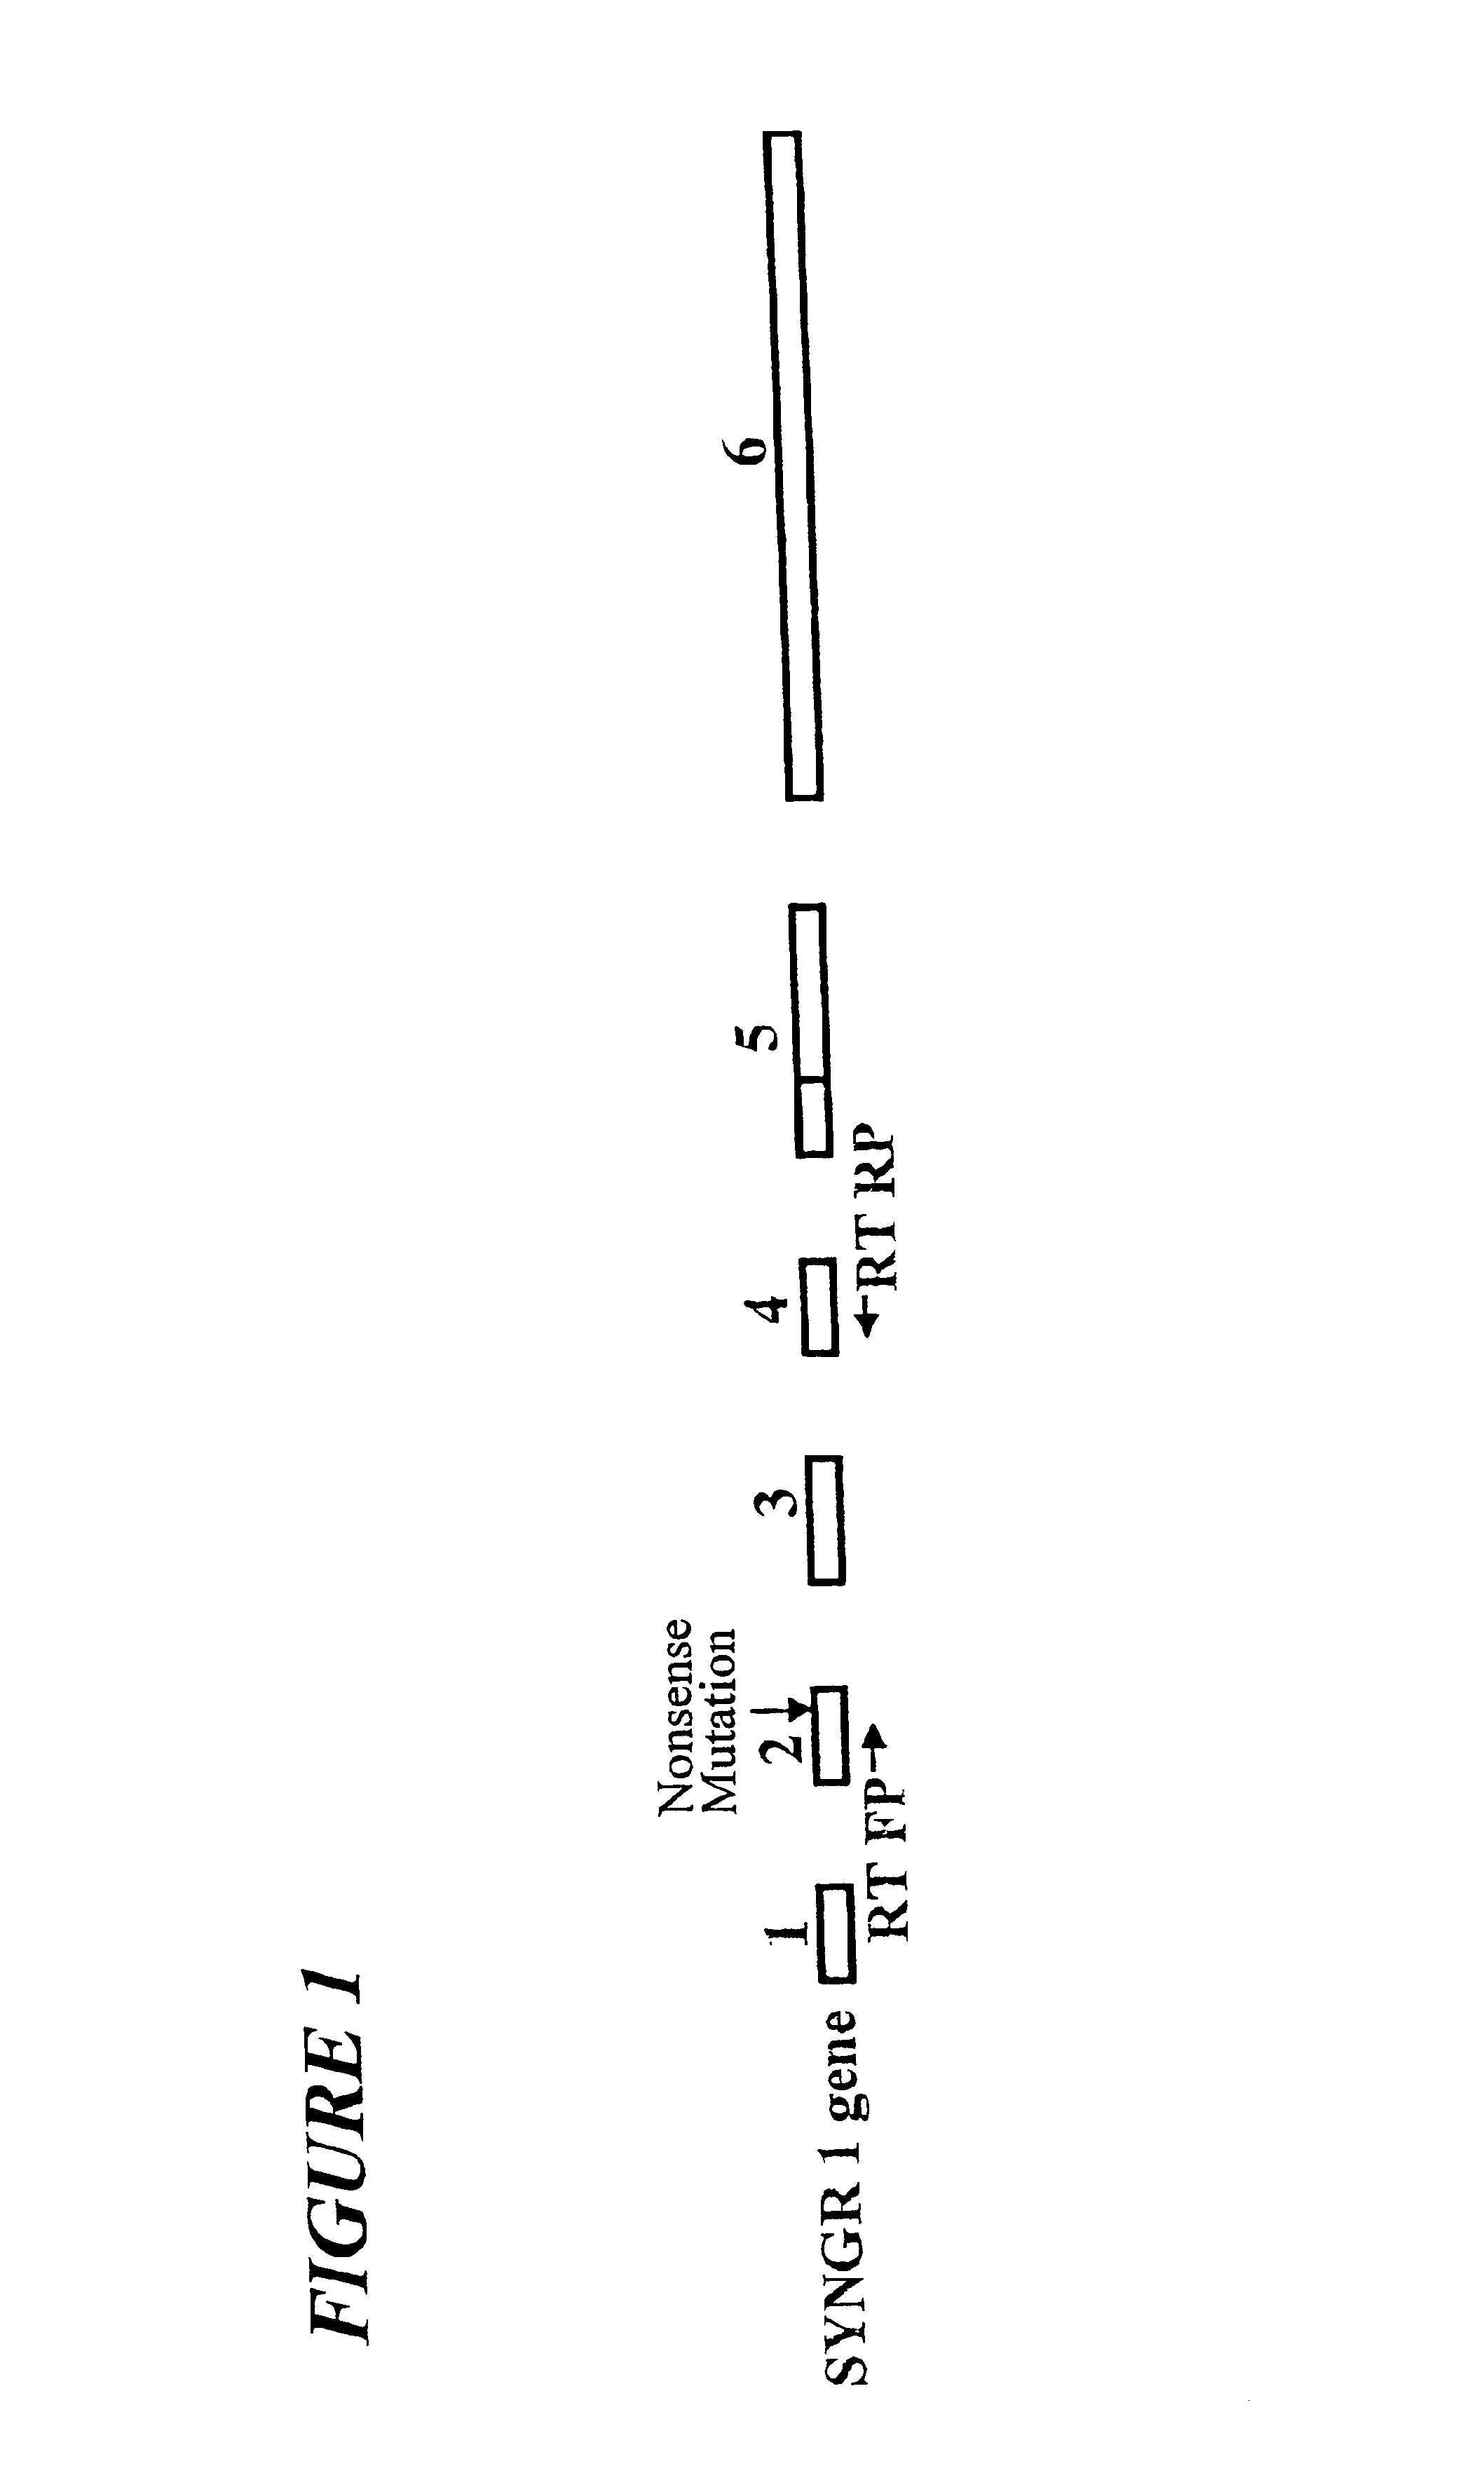 Primers for screening schizophrenia and a method thereof